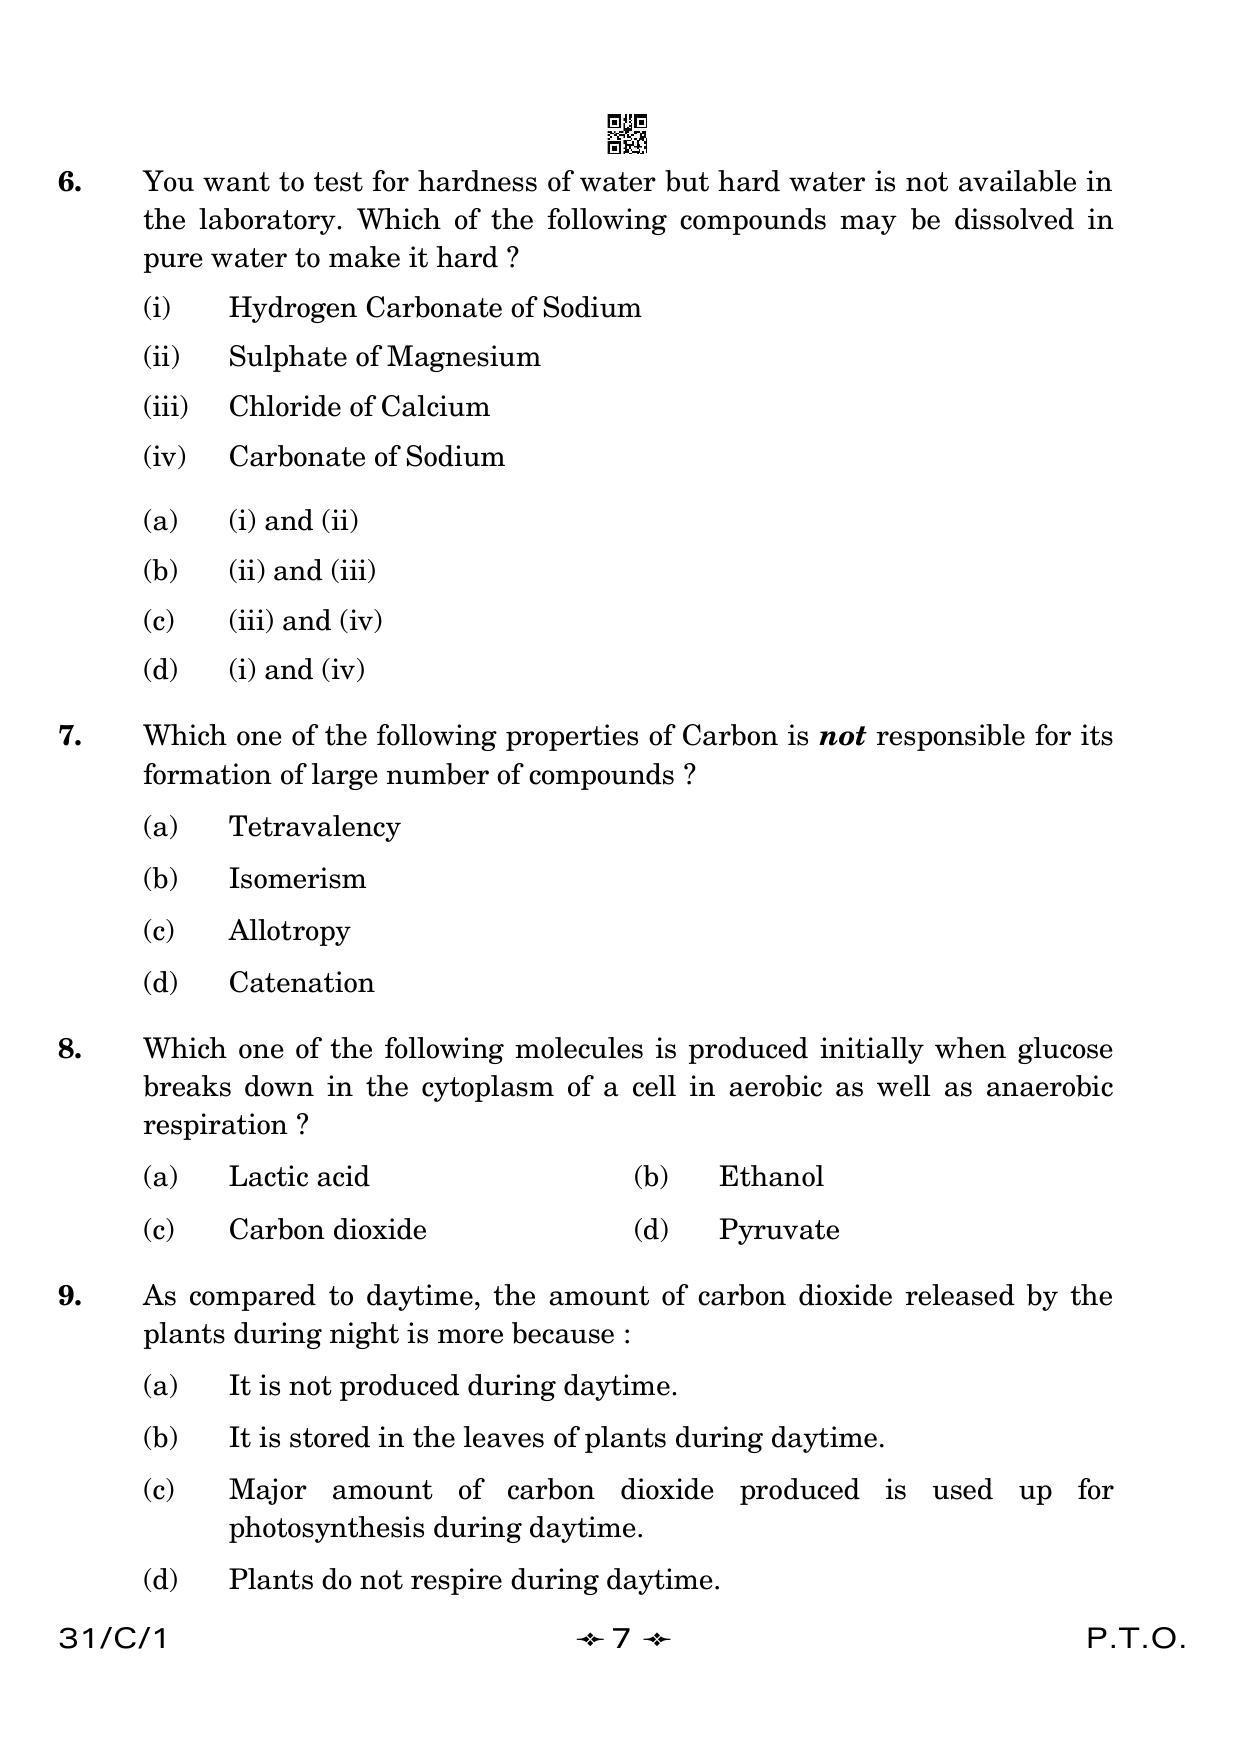 CBSE Class 10 31-1 Science 2023 (Compartment) Question Paper - Page 7